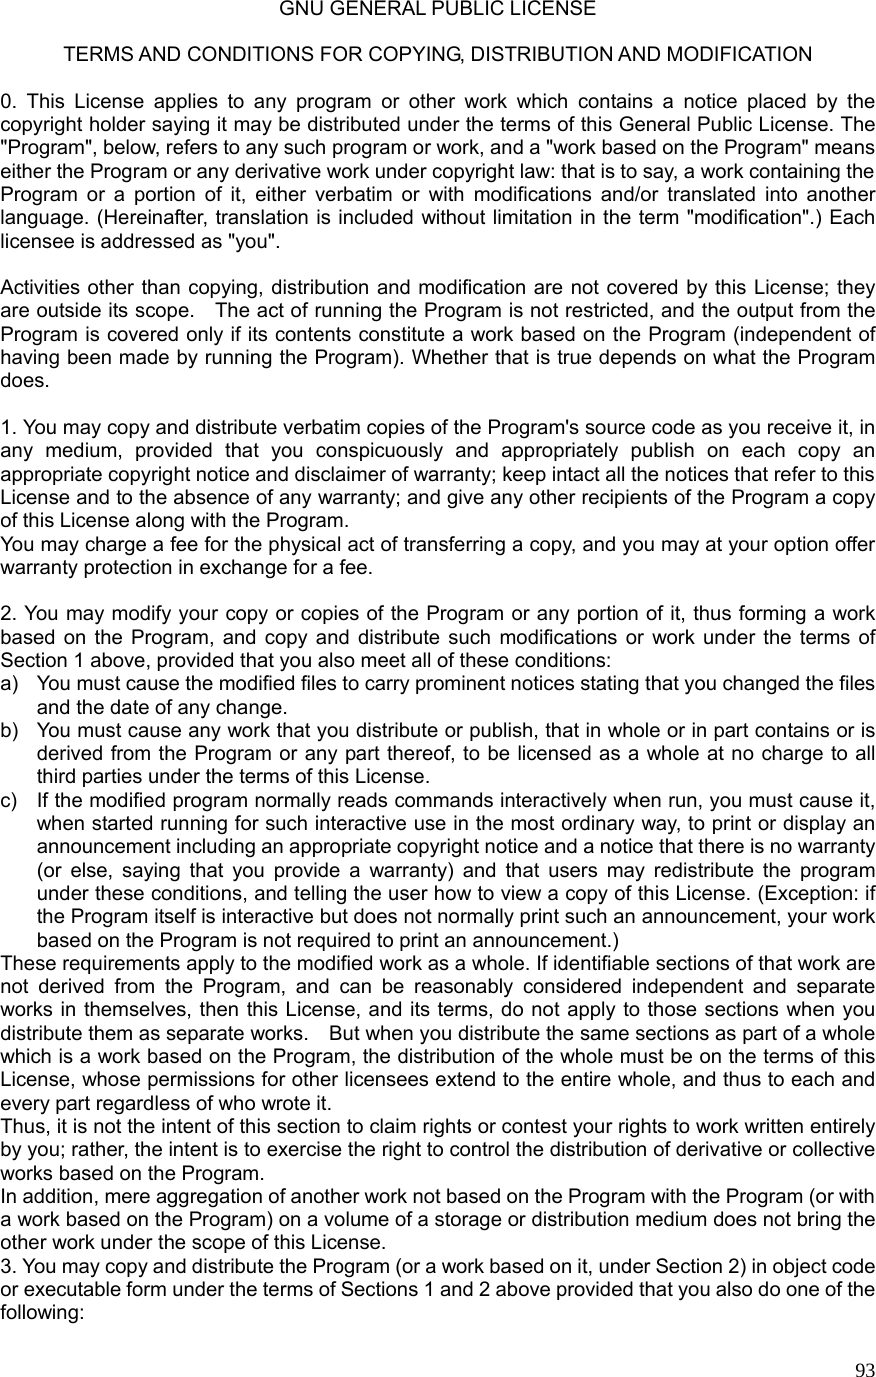  93GNU GENERAL PUBLIC LICENSE  TERMS AND CONDITIONS FOR COPYING, DISTRIBUTION AND MODIFICATION  0. This License applies to any program or other work which contains a notice placed by the copyright holder saying it may be distributed under the terms of this General Public License. The &quot;Program&quot;, below, refers to any such program or work, and a &quot;work based on the Program&quot; means either the Program or any derivative work under copyright law: that is to say, a work containing the Program or a portion of it, either verbatim or with modifications and/or translated into another language. (Hereinafter, translation is included without limitation in the term &quot;modification&quot;.) Each licensee is addressed as &quot;you&quot;.  Activities other than copying, distribution and modification are not covered by this License; they are outside its scope.    The act of running the Program is not restricted, and the output from the Program is covered only if its contents constitute a work based on the Program (independent of having been made by running the Program). Whether that is true depends on what the Program does.  1. You may copy and distribute verbatim copies of the Program&apos;s source code as you receive it, in any medium, provided that you conspicuously and appropriately publish on each copy an appropriate copyright notice and disclaimer of warranty; keep intact all the notices that refer to this License and to the absence of any warranty; and give any other recipients of the Program a copy of this License along with the Program. You may charge a fee for the physical act of transferring a copy, and you may at your option offer warranty protection in exchange for a fee.  2. You may modify your copy or copies of the Program or any portion of it, thus forming a work based on the Program, and copy and distribute such modifications or work under the terms of Section 1 above, provided that you also meet all of these conditions: a)  You must cause the modified files to carry prominent notices stating that you changed the files and the date of any change. b)  You must cause any work that you distribute or publish, that in whole or in part contains or is derived from the Program or any part thereof, to be licensed as a whole at no charge to all third parties under the terms of this License. c)  If the modified program normally reads commands interactively when run, you must cause it, when started running for such interactive use in the most ordinary way, to print or display an announcement including an appropriate copyright notice and a notice that there is no warranty (or else, saying that you provide a warranty) and that users may redistribute the program under these conditions, and telling the user how to view a copy of this License. (Exception: if the Program itself is interactive but does not normally print such an announcement, your work based on the Program is not required to print an announcement.) These requirements apply to the modified work as a whole. If identifiable sections of that work are not derived from the Program, and can be reasonably considered independent and separate works in themselves, then this License, and its terms, do not apply to those sections when you distribute them as separate works.    But when you distribute the same sections as part of a whole which is a work based on the Program, the distribution of the whole must be on the terms of this License, whose permissions for other licensees extend to the entire whole, and thus to each and every part regardless of who wrote it. Thus, it is not the intent of this section to claim rights or contest your rights to work written entirely by you; rather, the intent is to exercise the right to control the distribution of derivative or collective works based on the Program. In addition, mere aggregation of another work not based on the Program with the Program (or with a work based on the Program) on a volume of a storage or distribution medium does not bring the other work under the scope of this License. 3. You may copy and distribute the Program (or a work based on it, under Section 2) in object code or executable form under the terms of Sections 1 and 2 above provided that you also do one of the following: 